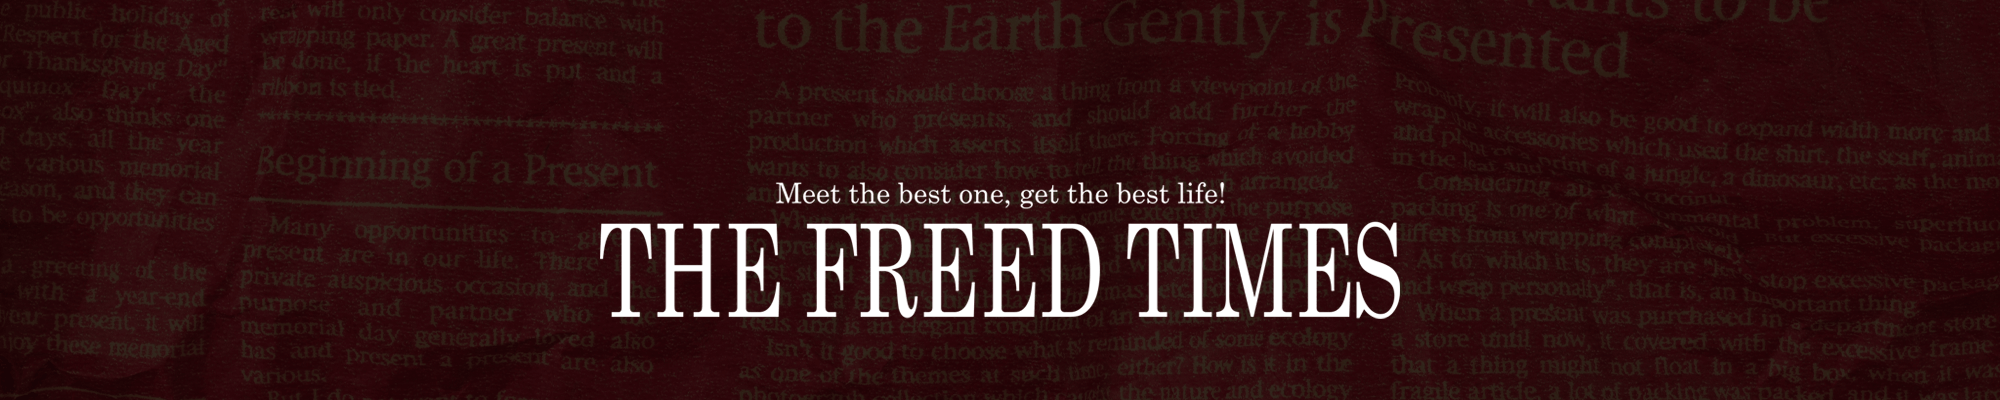 THE FREED TIMES